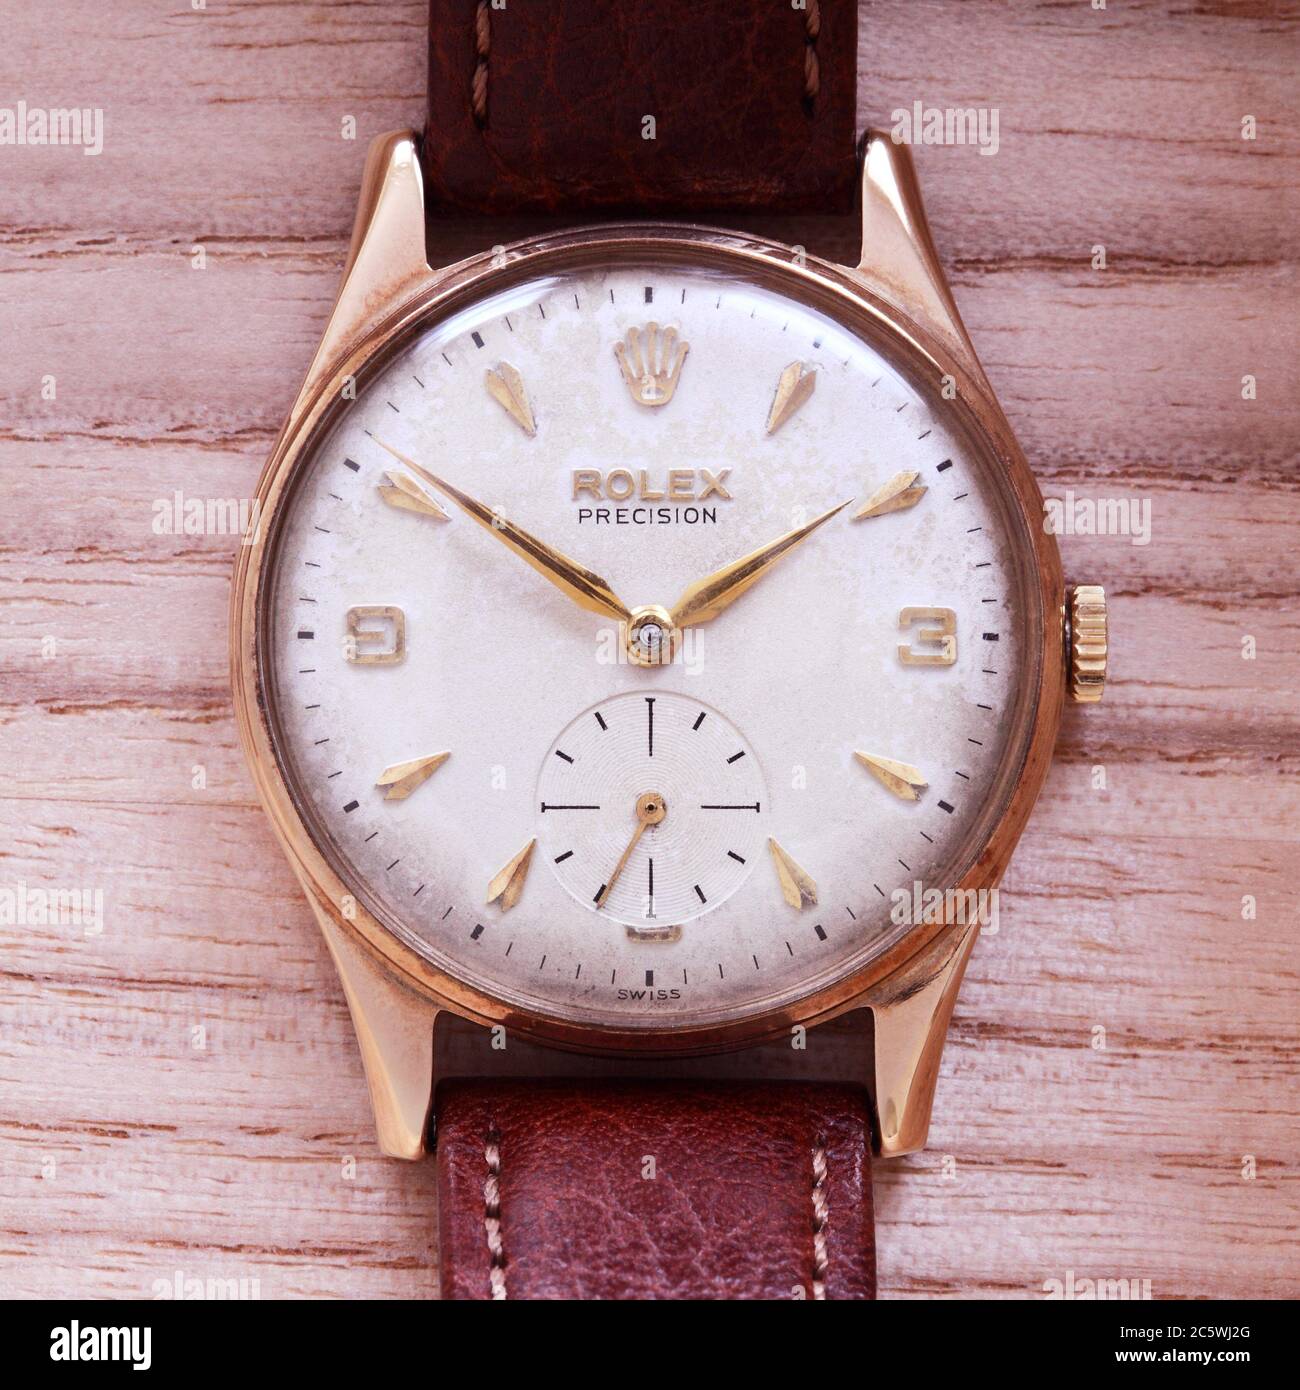 1958 Rolex Precision vintage wristwatch in 9c gold of made case Stock Photo Alamy